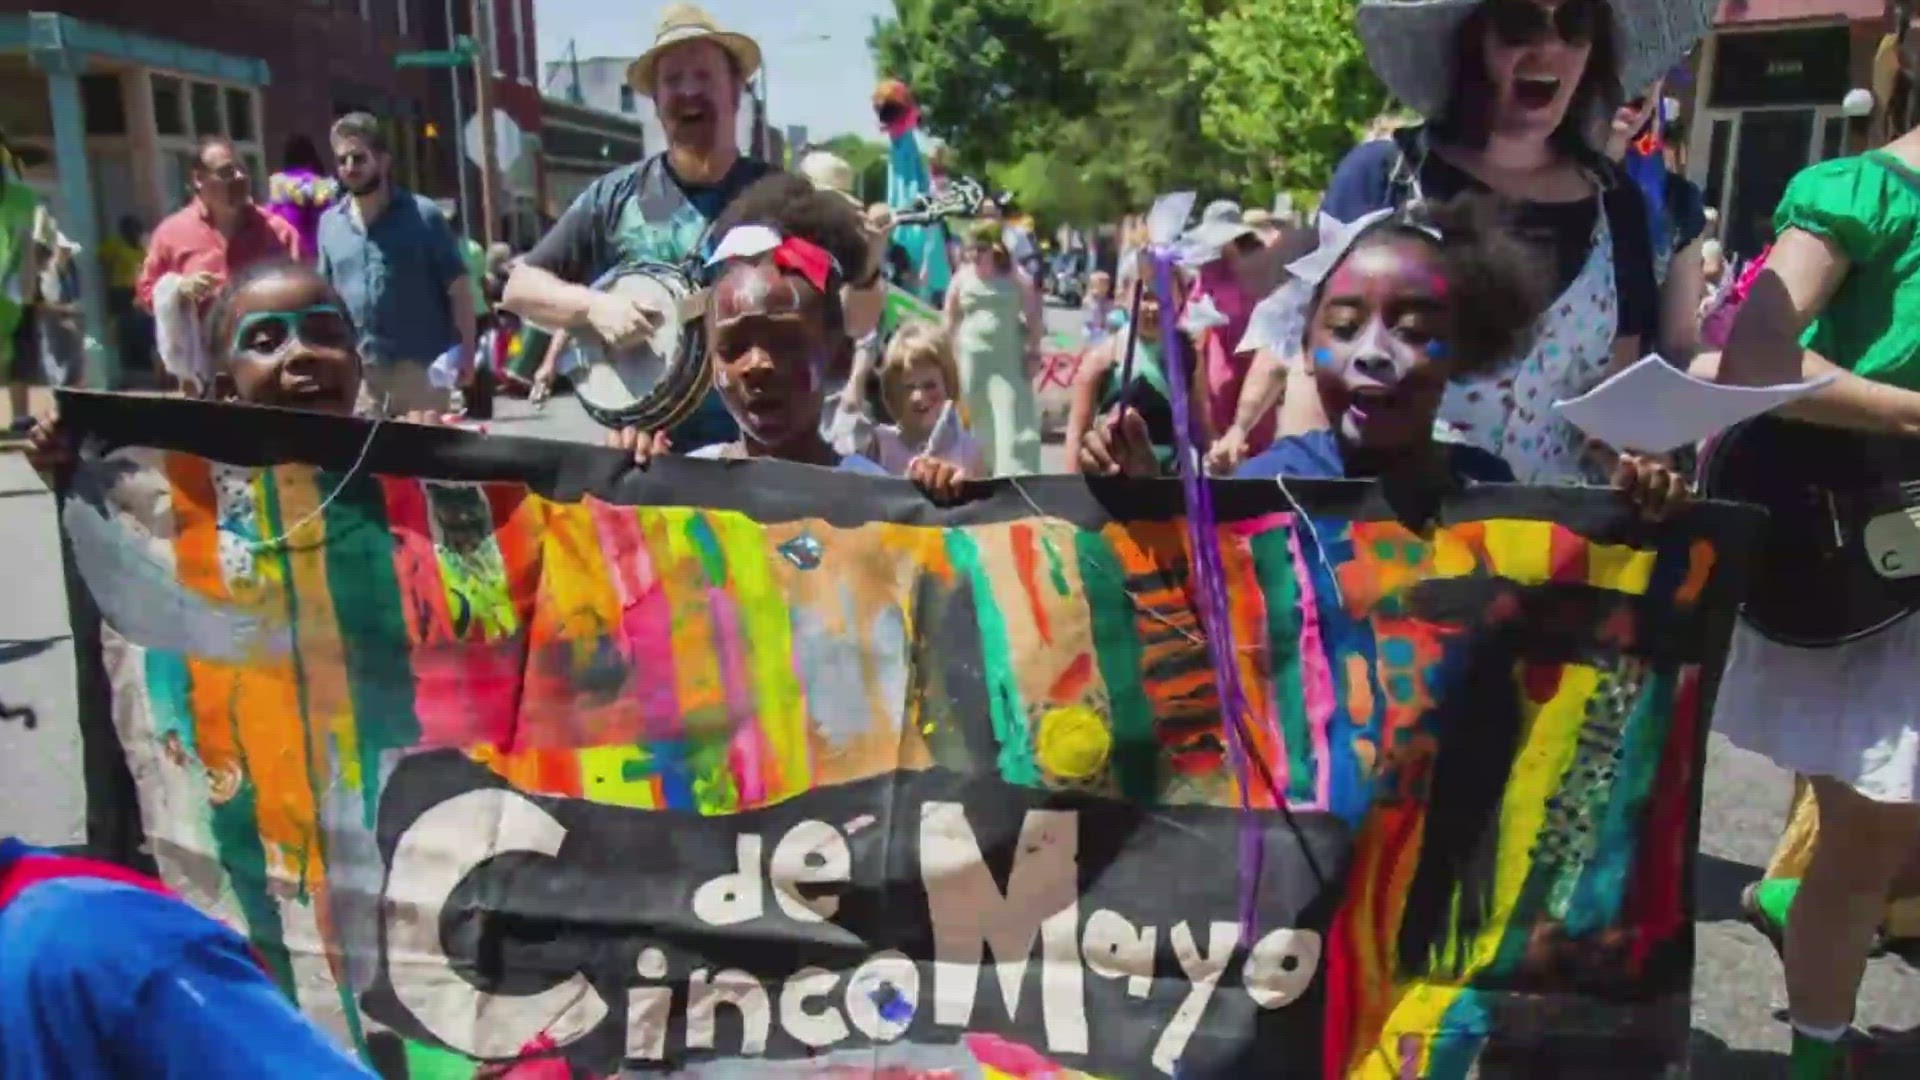 Schlafly is celebrating with a special brew. Cherokee Street's Cinco de Mayo Festival is one of the St. Louis area's largest Cinco de Mayo celebrations.